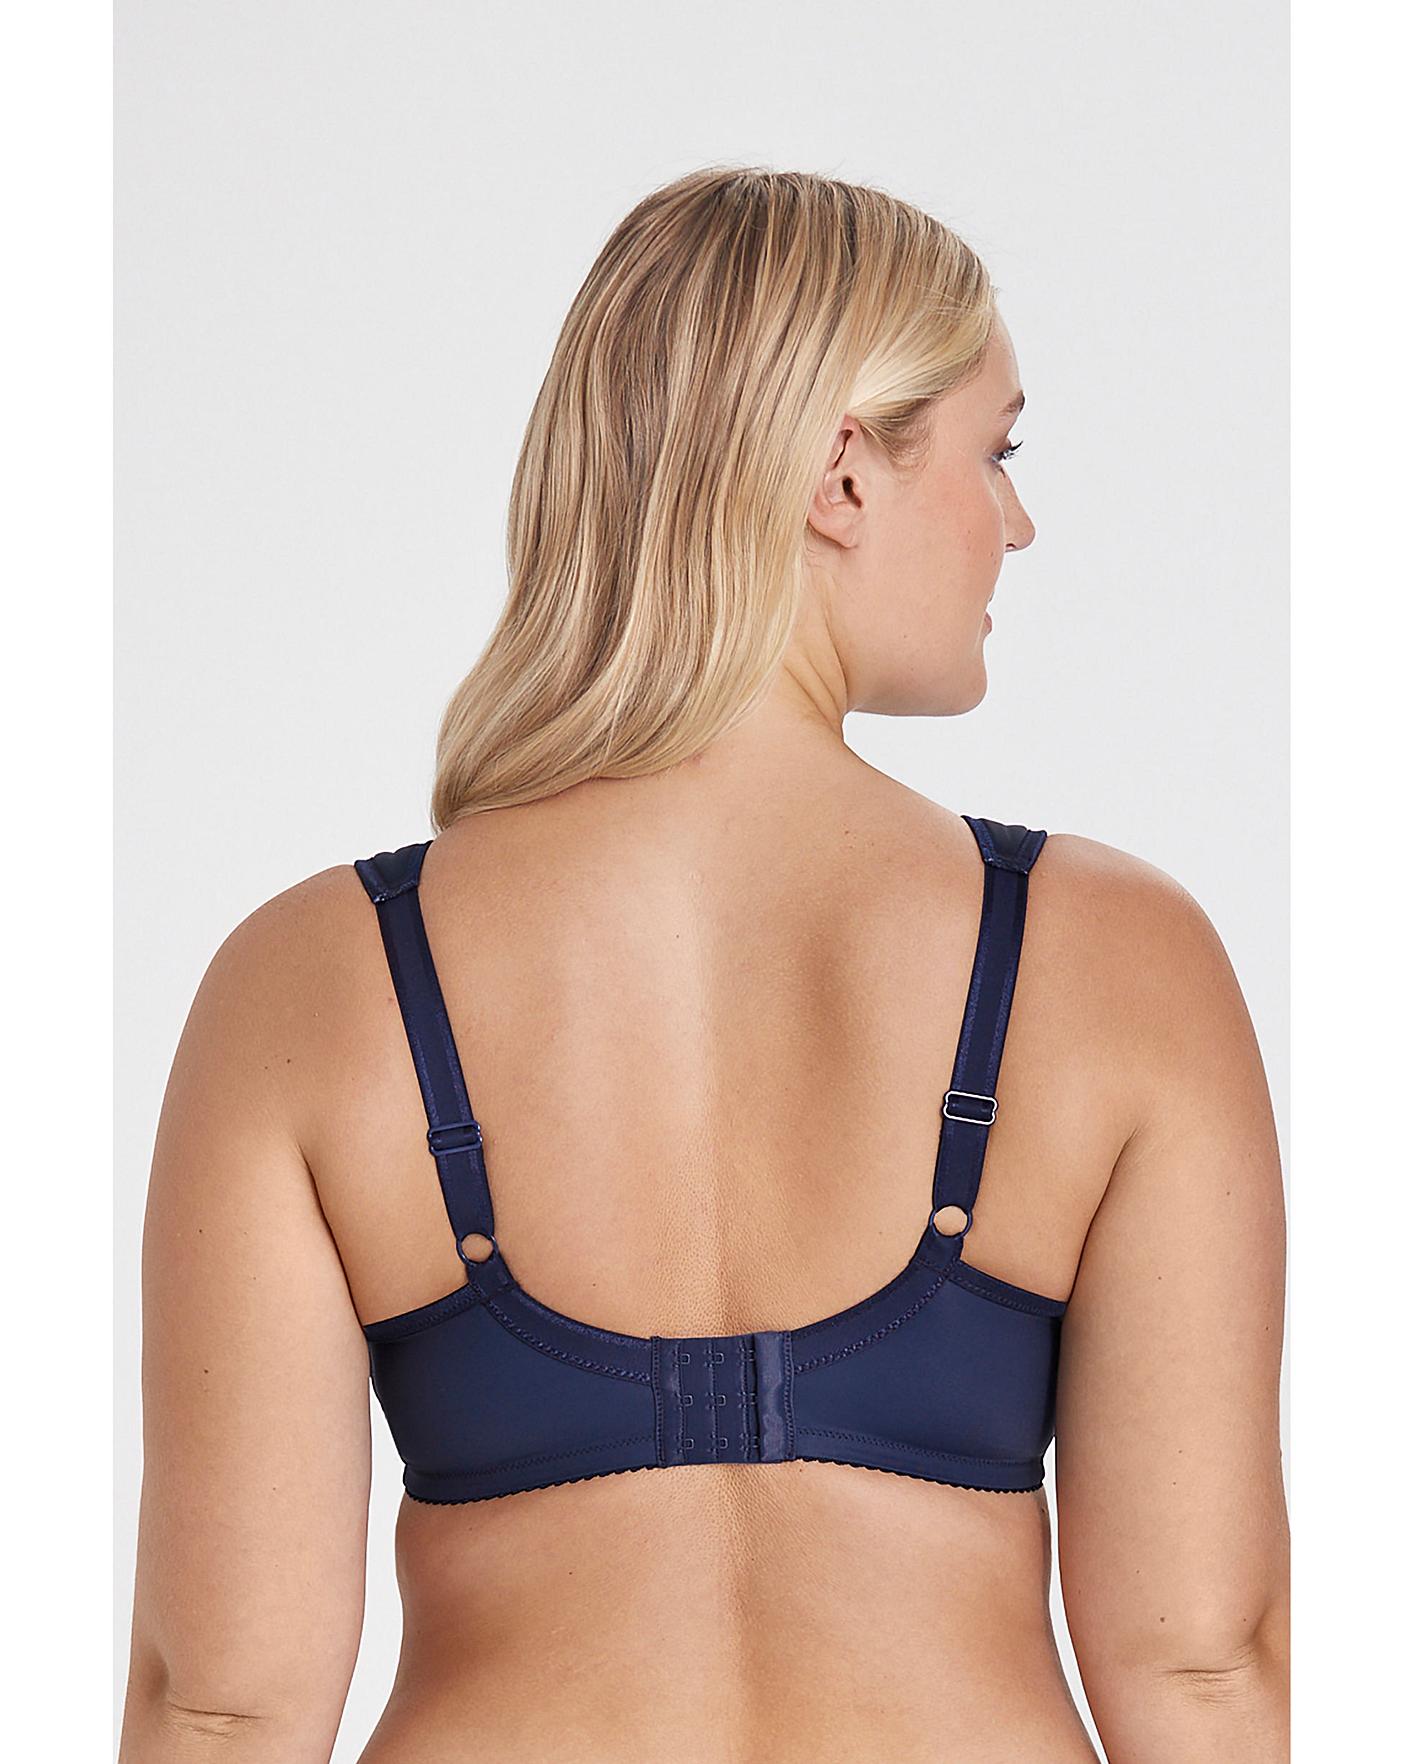 Smooth Lacy Underwired T-Shirt Bra by Miss Mary of Sweden